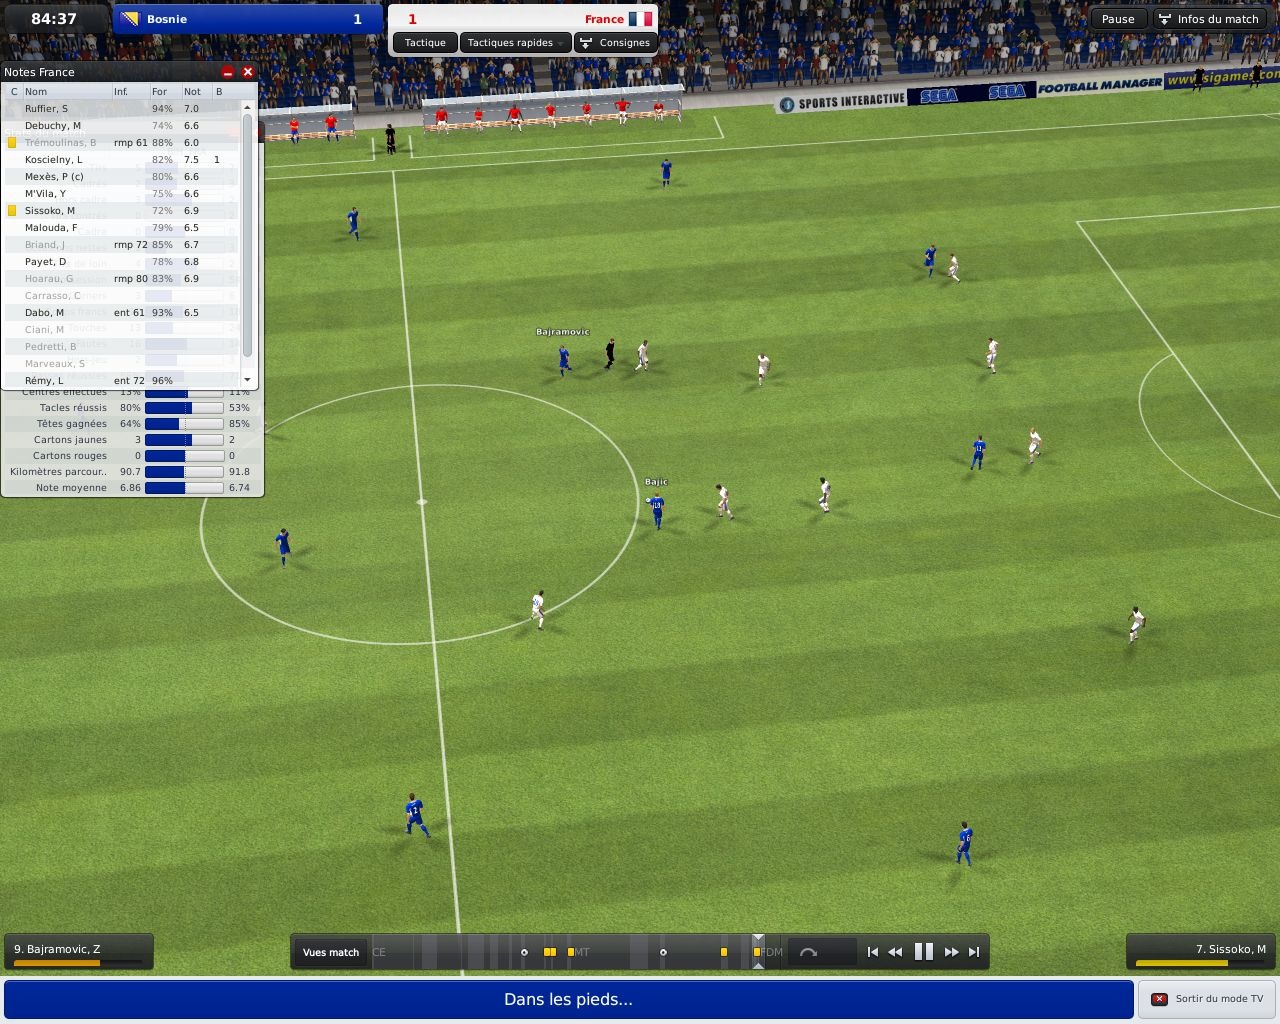 http://image.jeuxvideo.com/images/pc/f/o/football-manager-2011-pc-028.jpg